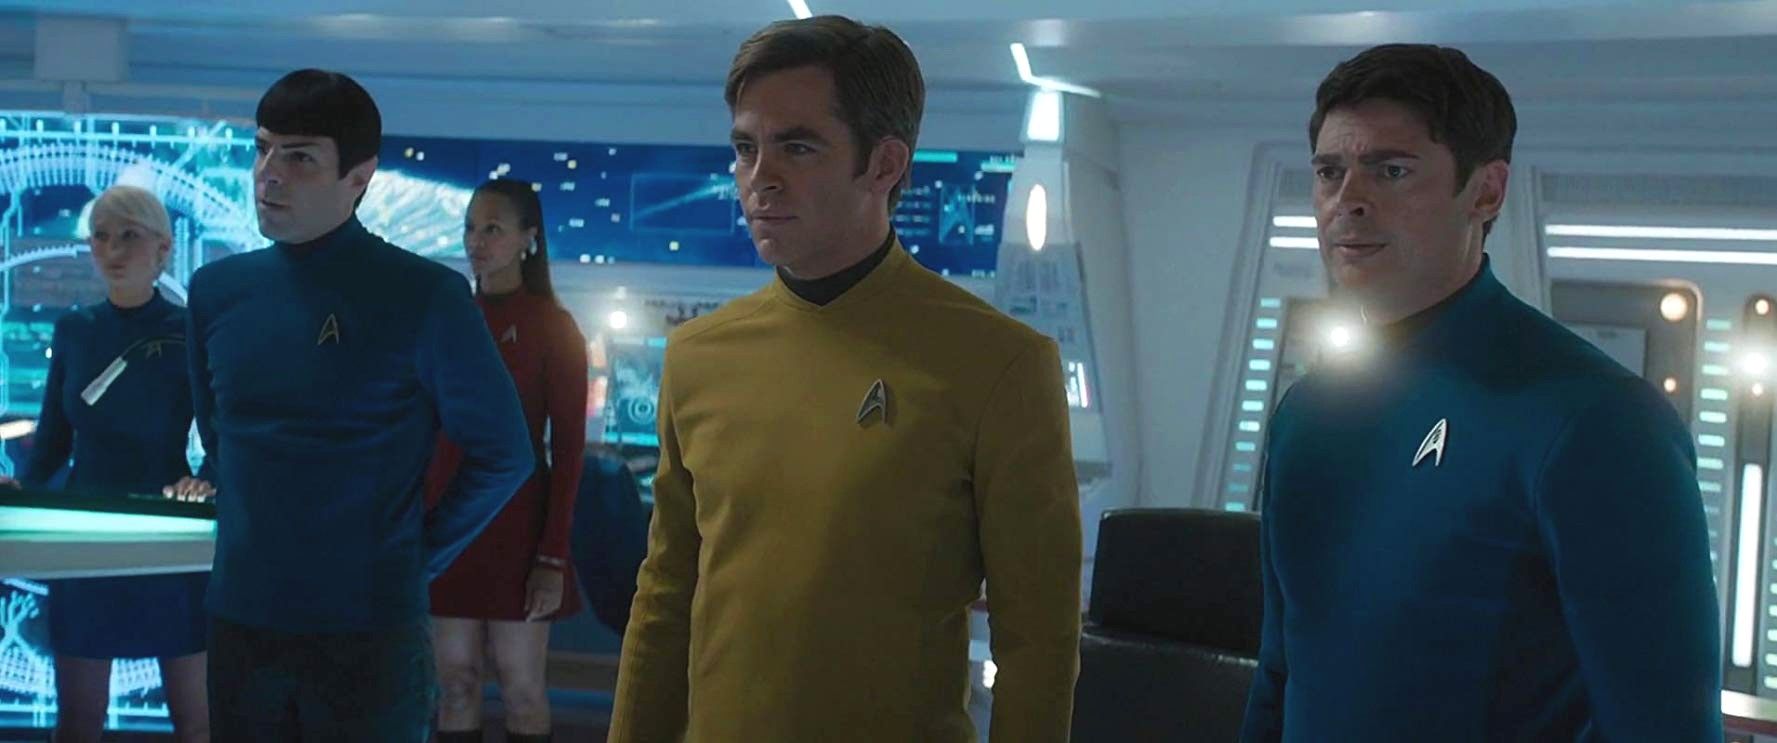 kirk and spock 2022